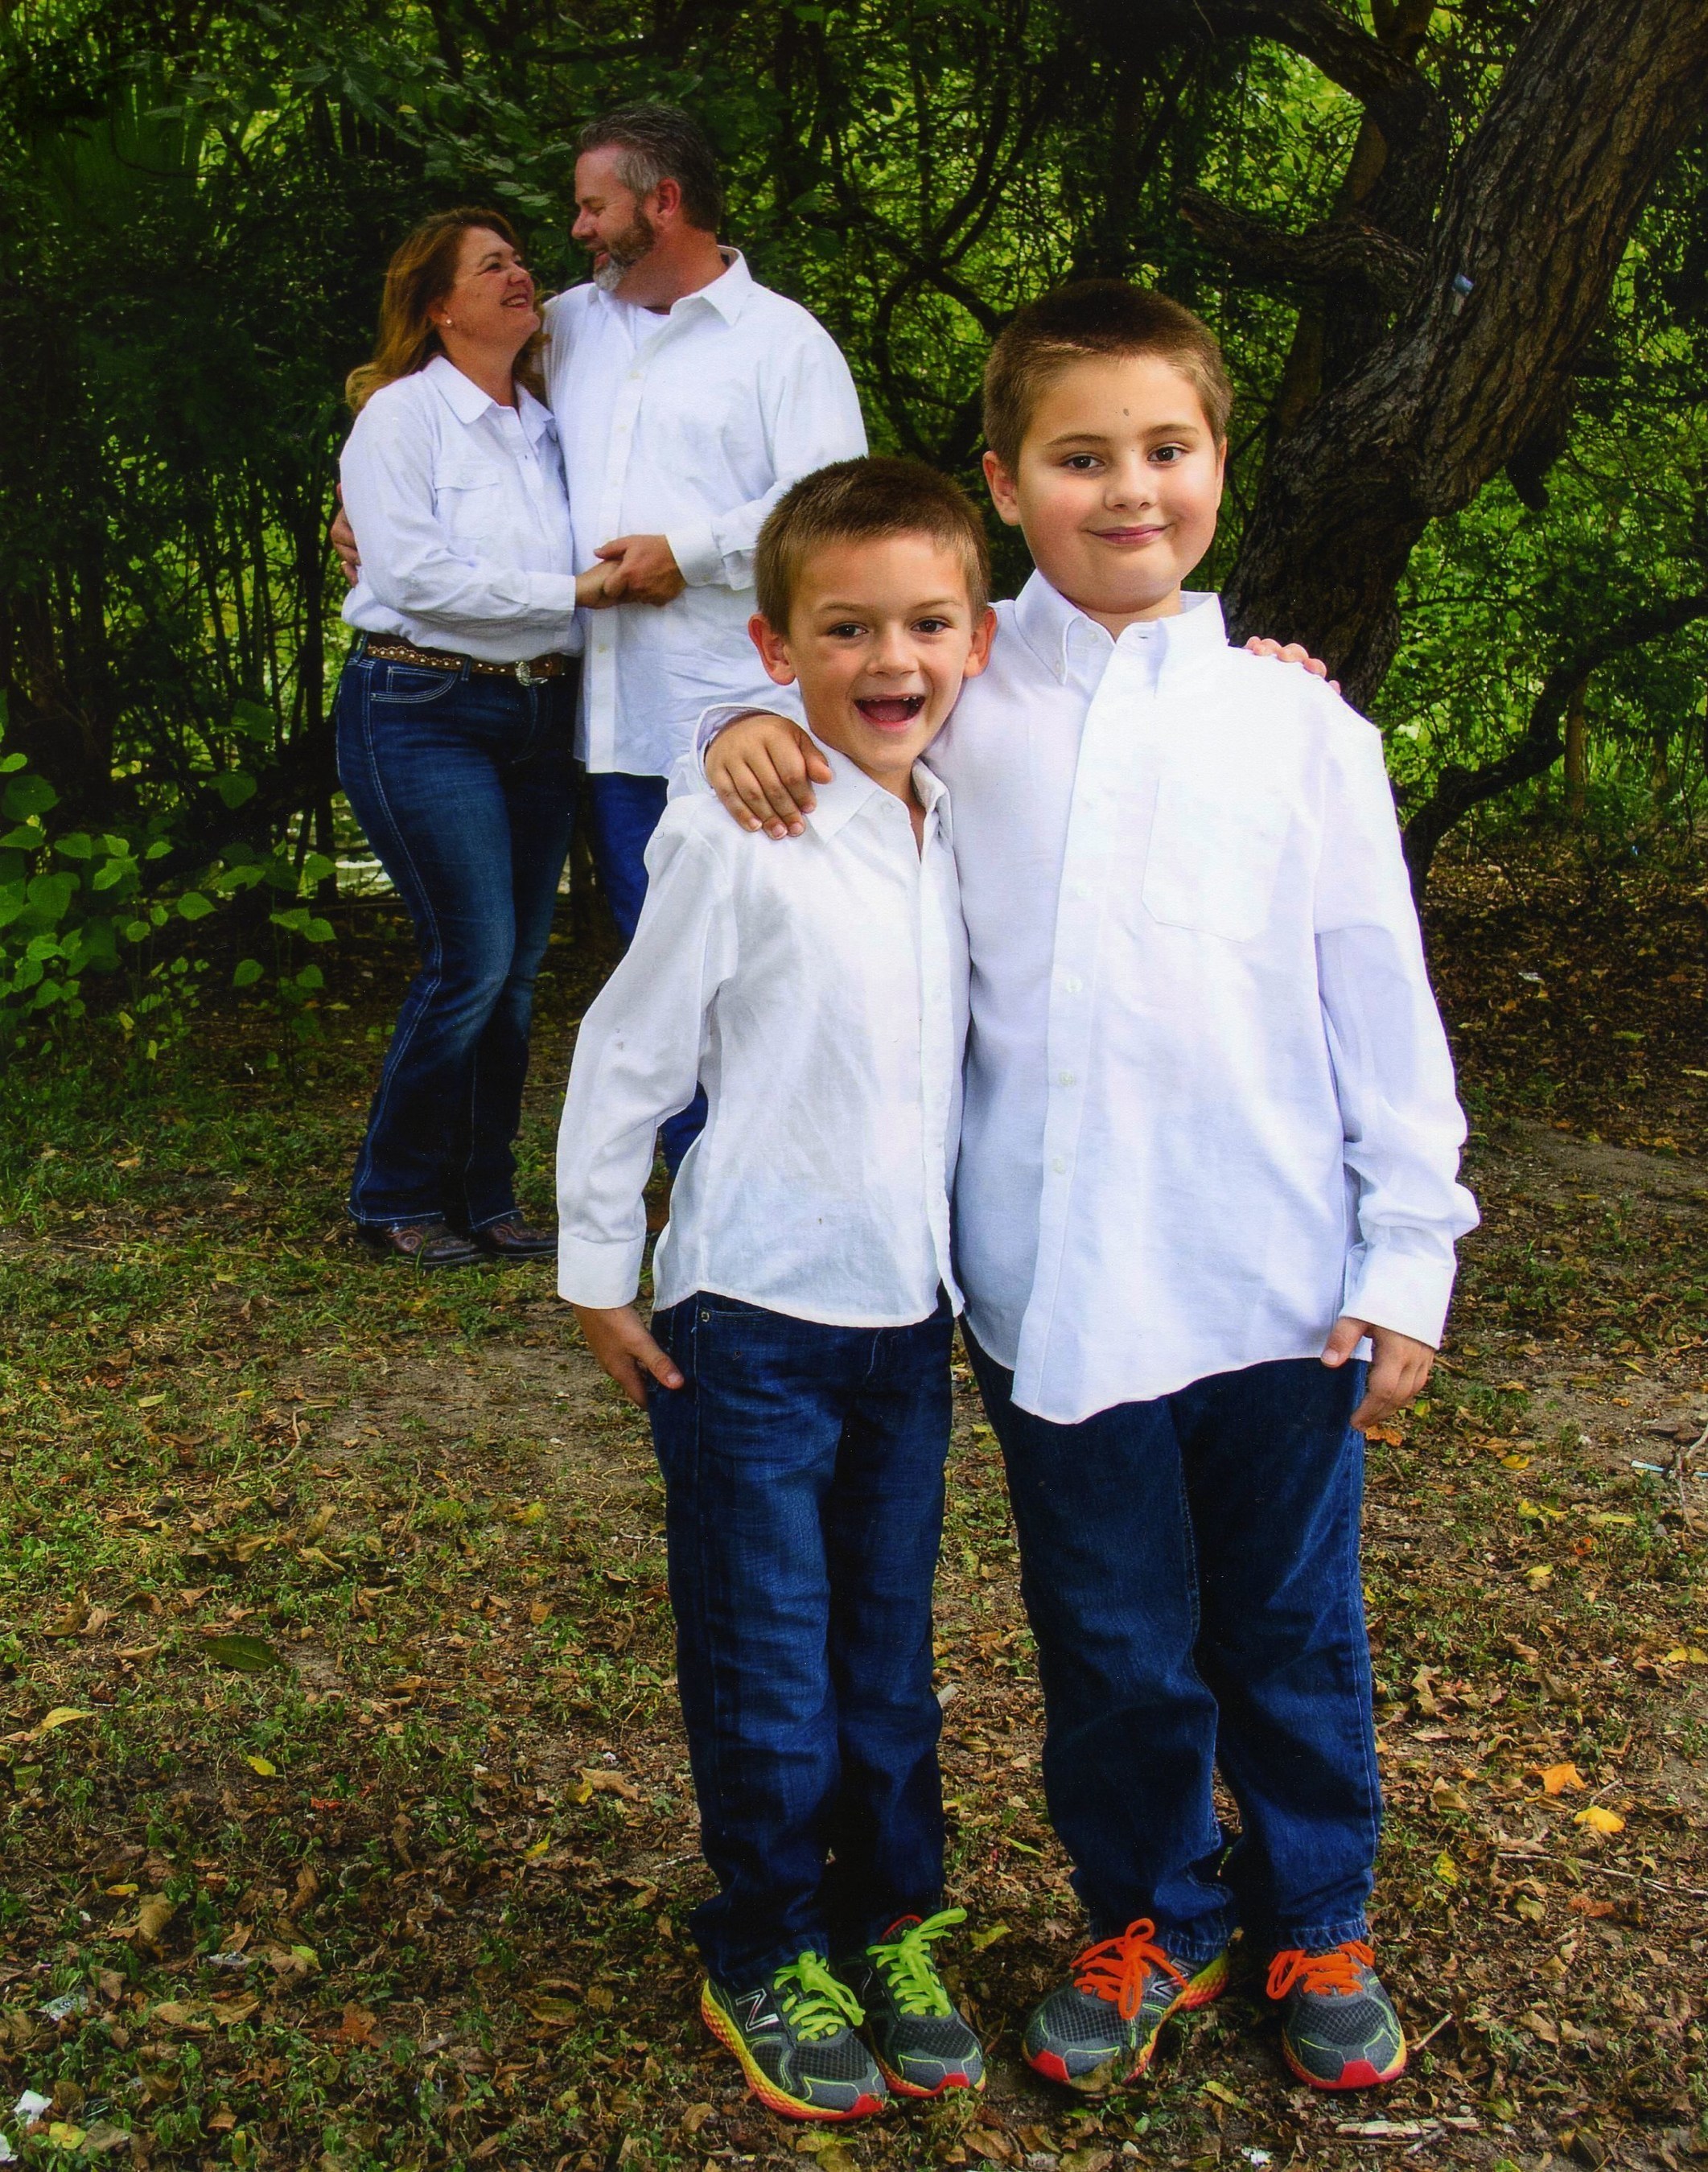 Brothers Jack and J.D. Roberts, shown here with their parents, Candice and Ronnie Roberts, were born prematurely. With support from the March of Dimes and the research it funds, today the boys are active and thriving at ages six and eight.